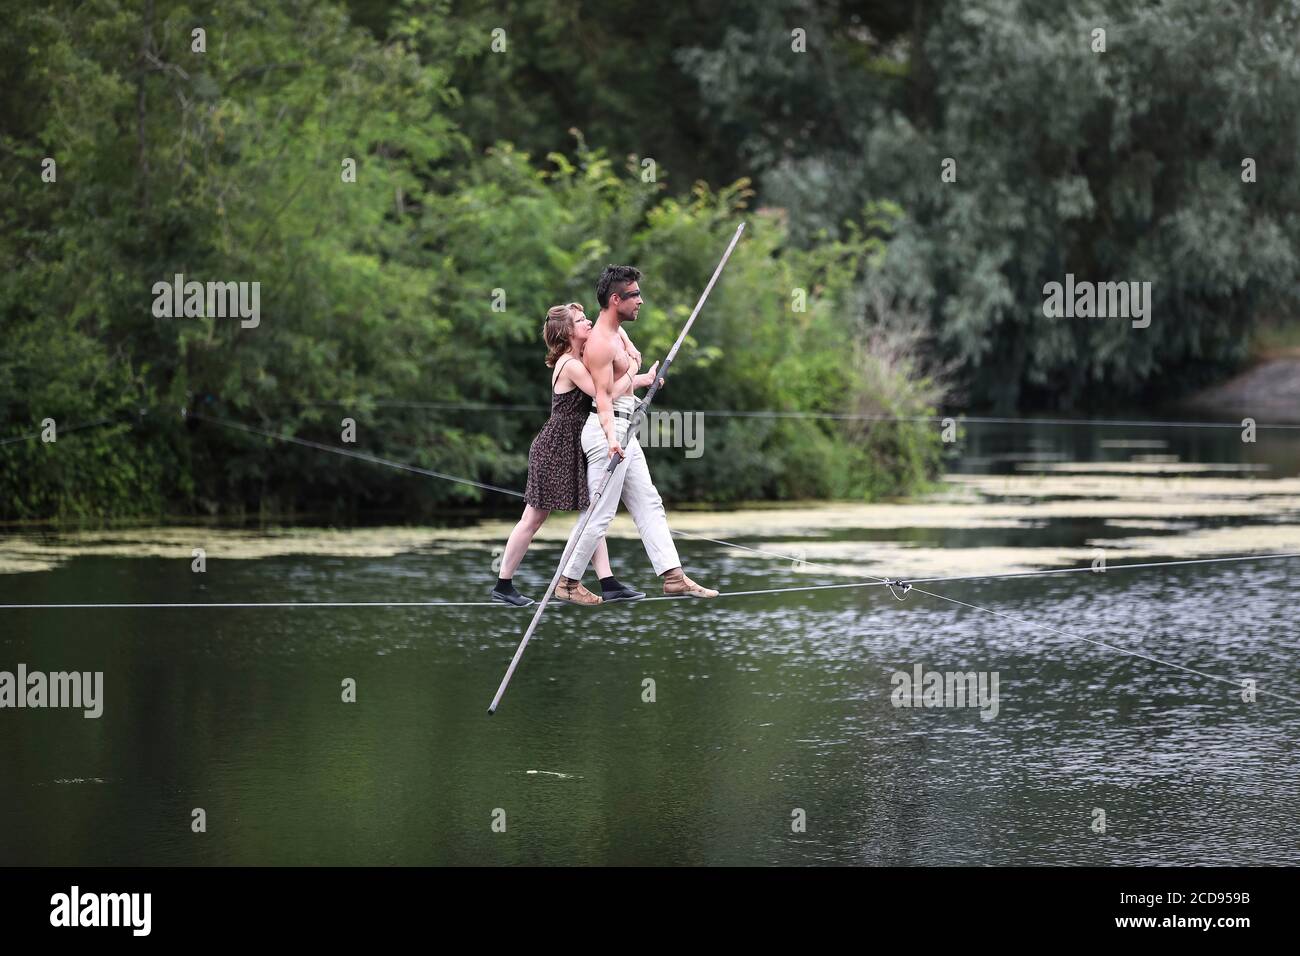 France, Indre et Loire, Cher valley, Jour de Cher, dam of Nitray, Athee sur Cher, tightrope walker, popular event imagined by the Blere - Val de Cher community of communes to highlight the Cher valley and its river heritage Stock Photo